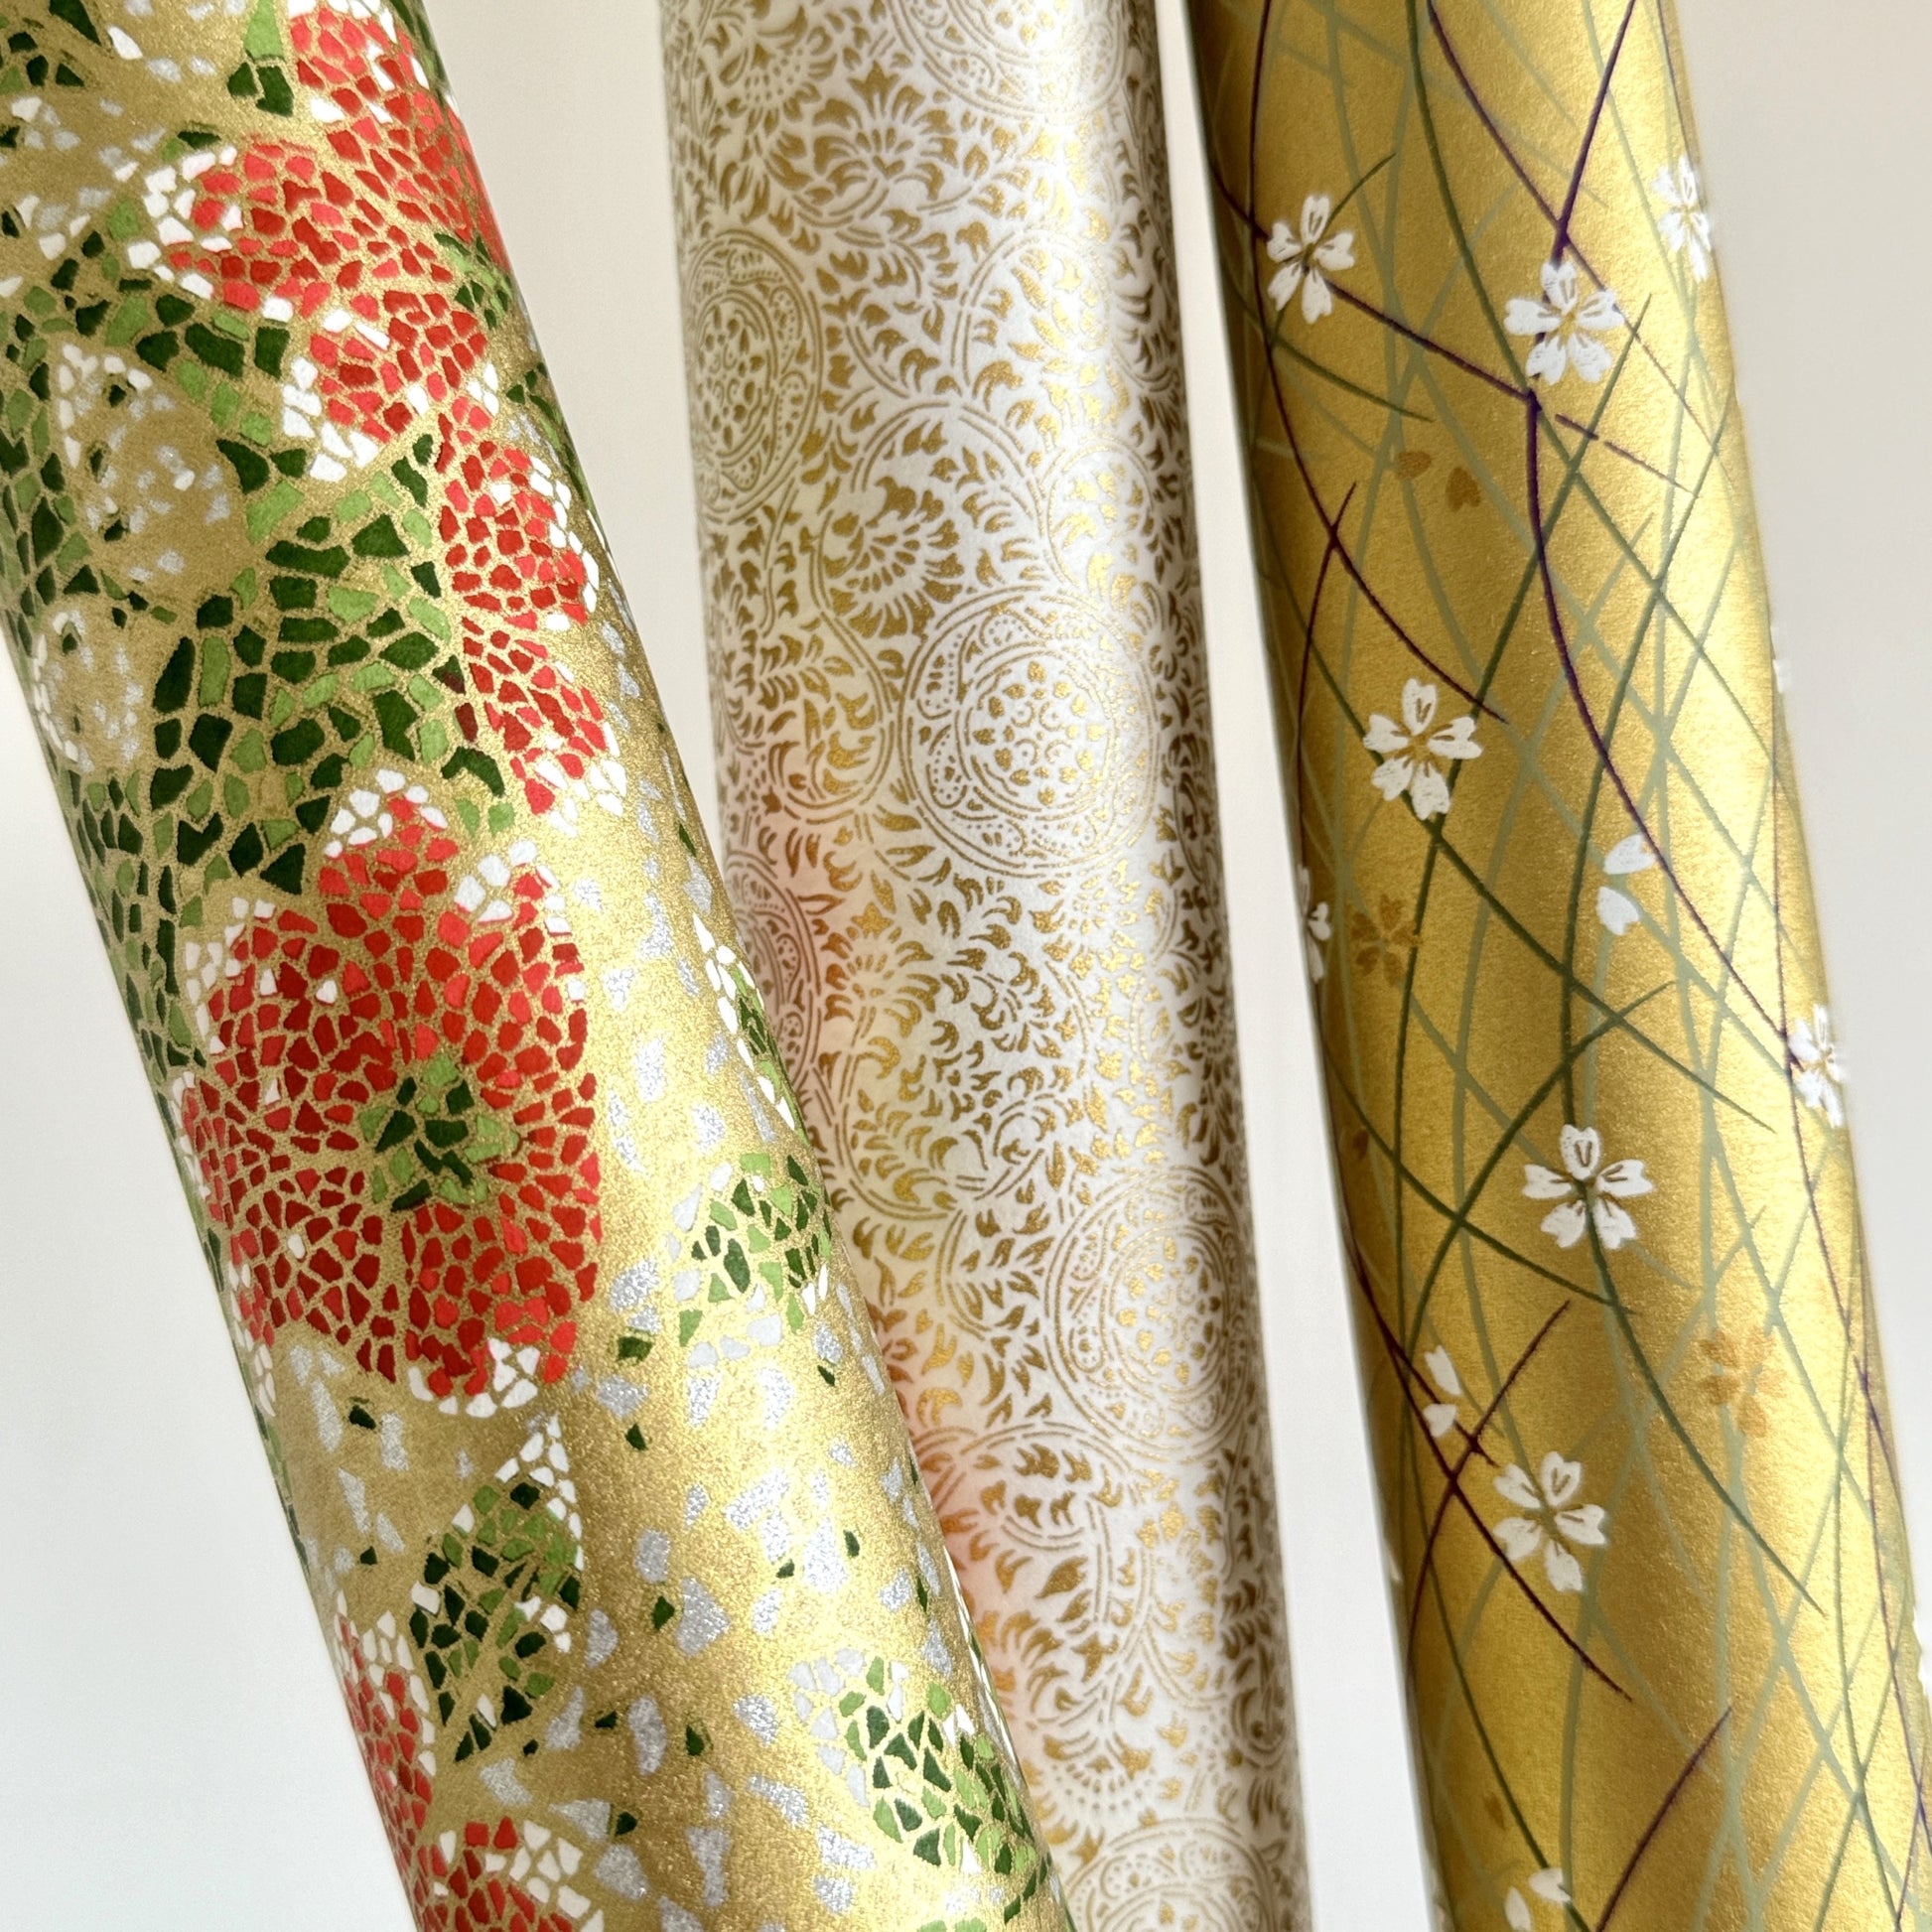 Japanese silkscreen chiyogami paper with a mosaic pattern of scarlet chrysanthemums on gold with green foliage. Pictured rolled with other designs.